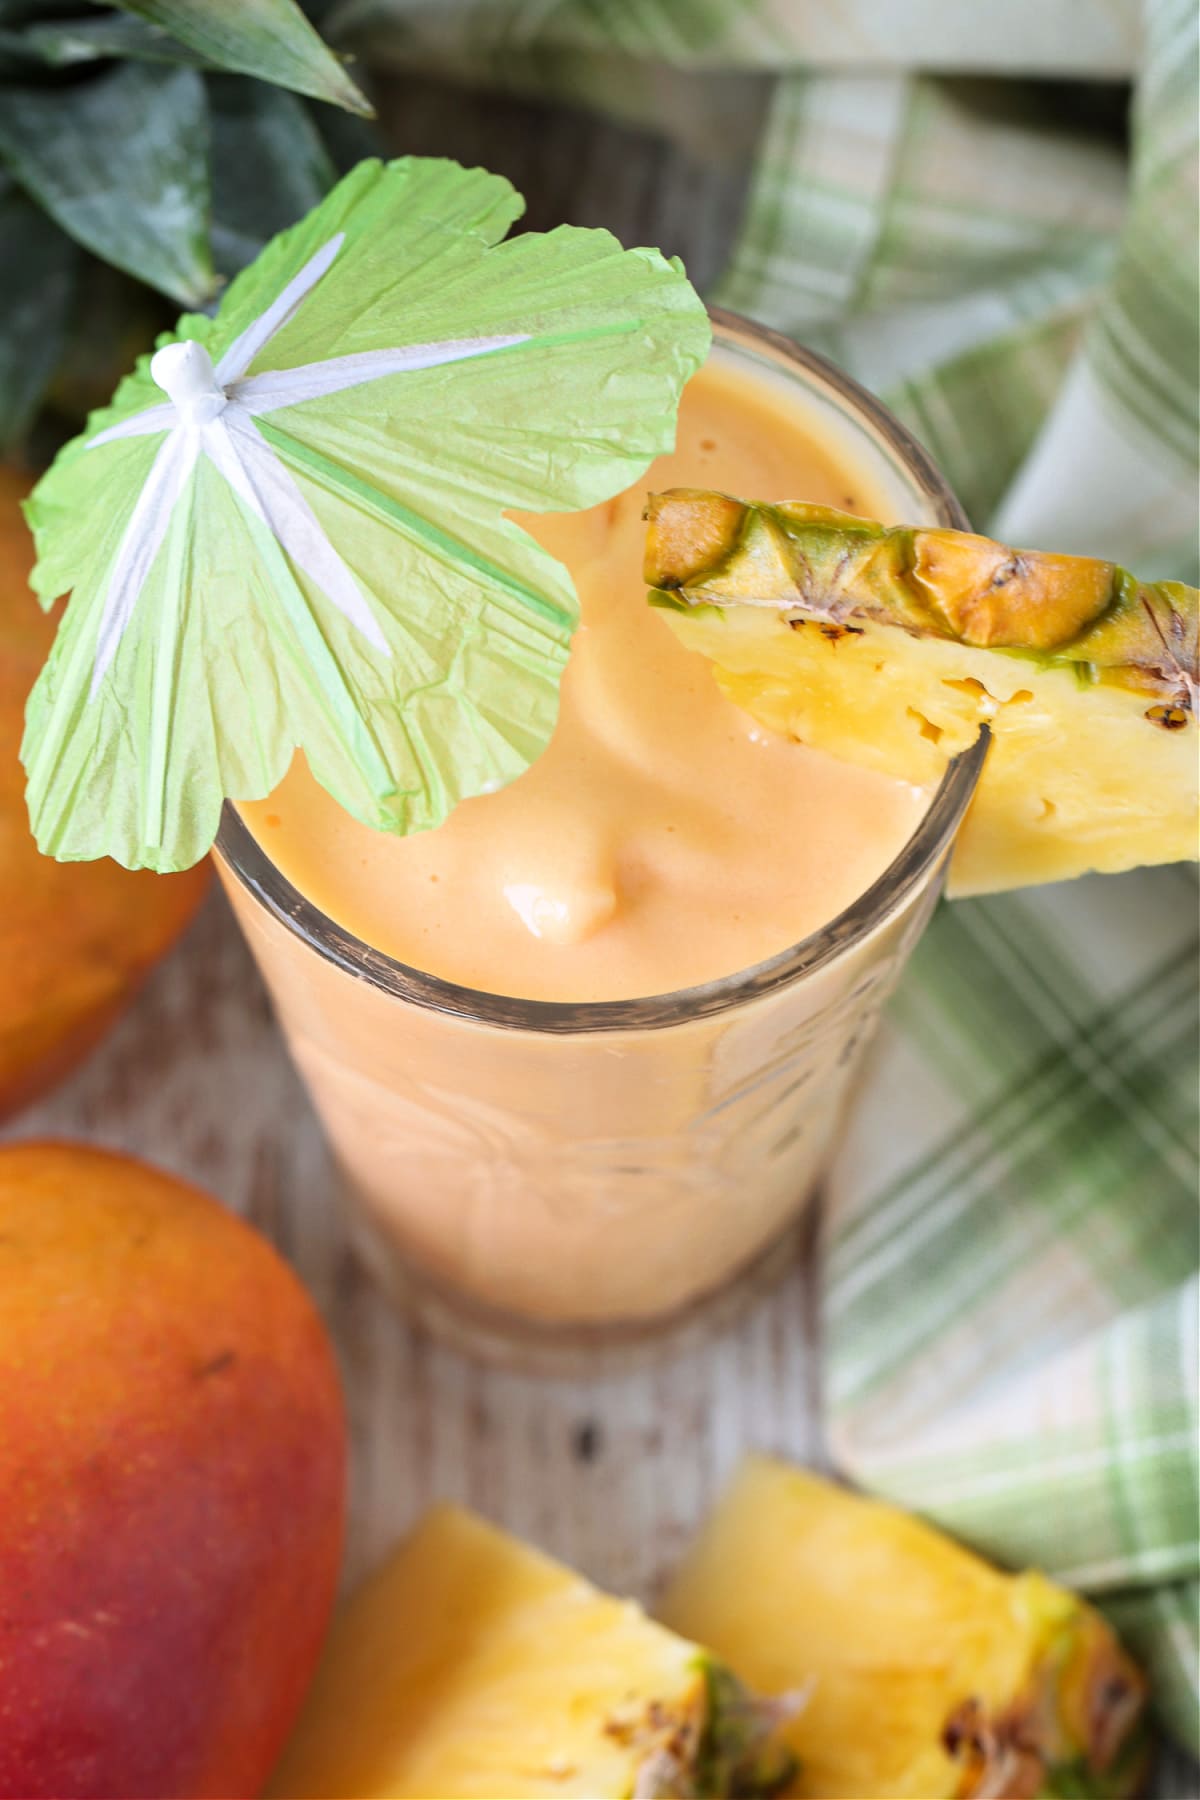 mango smoothie in glass with umbrella and fresh pineapple from top